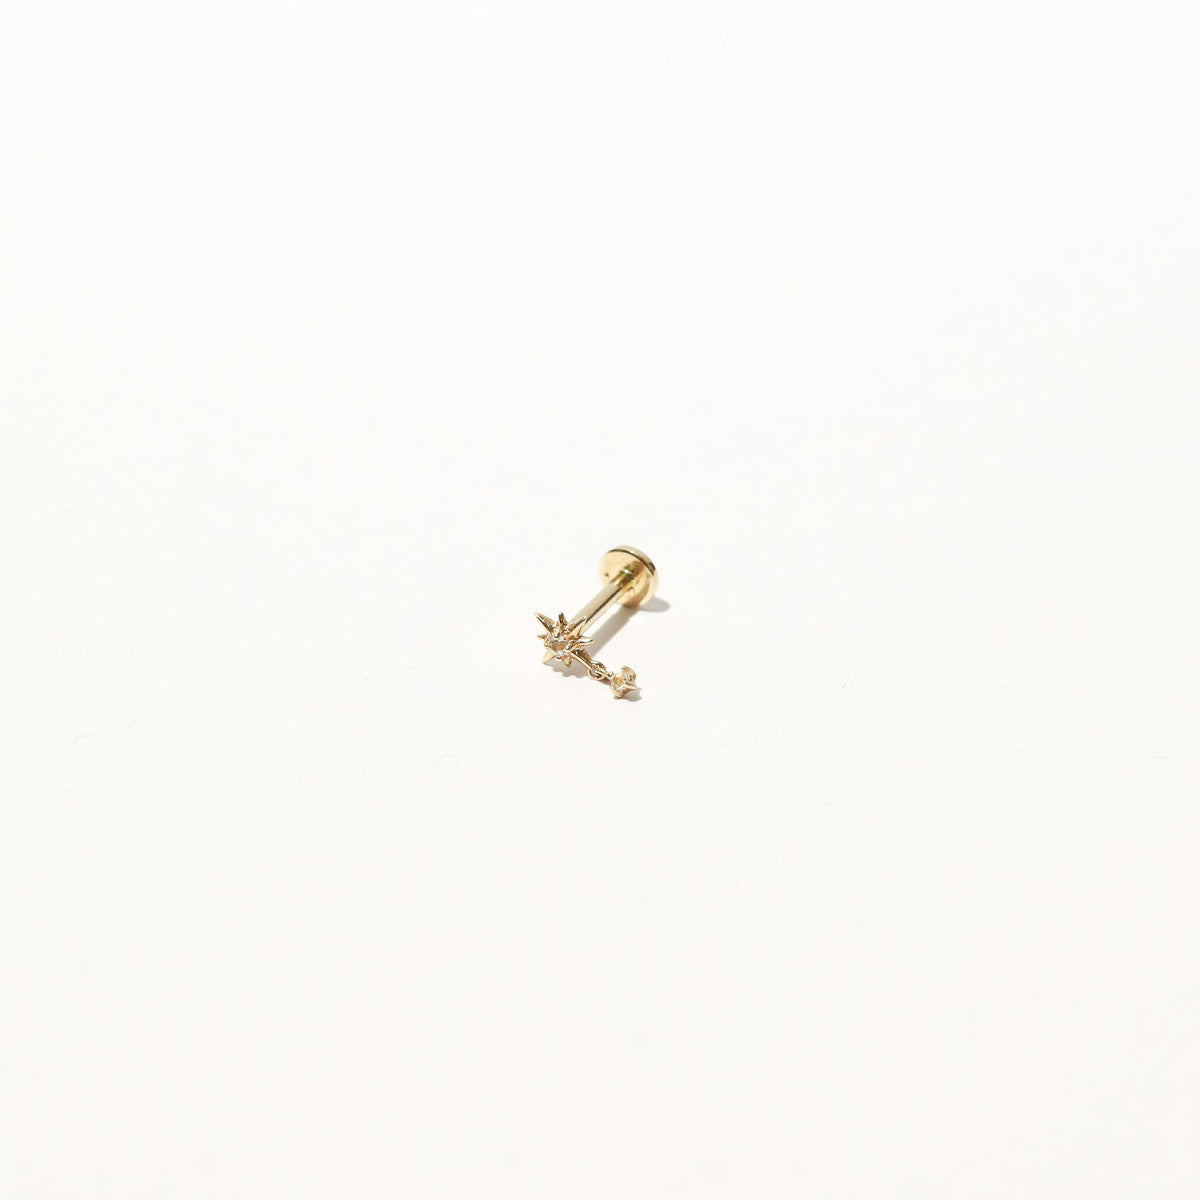 Twilight Star Charm Piercing Stud in Solid Gold flat lay